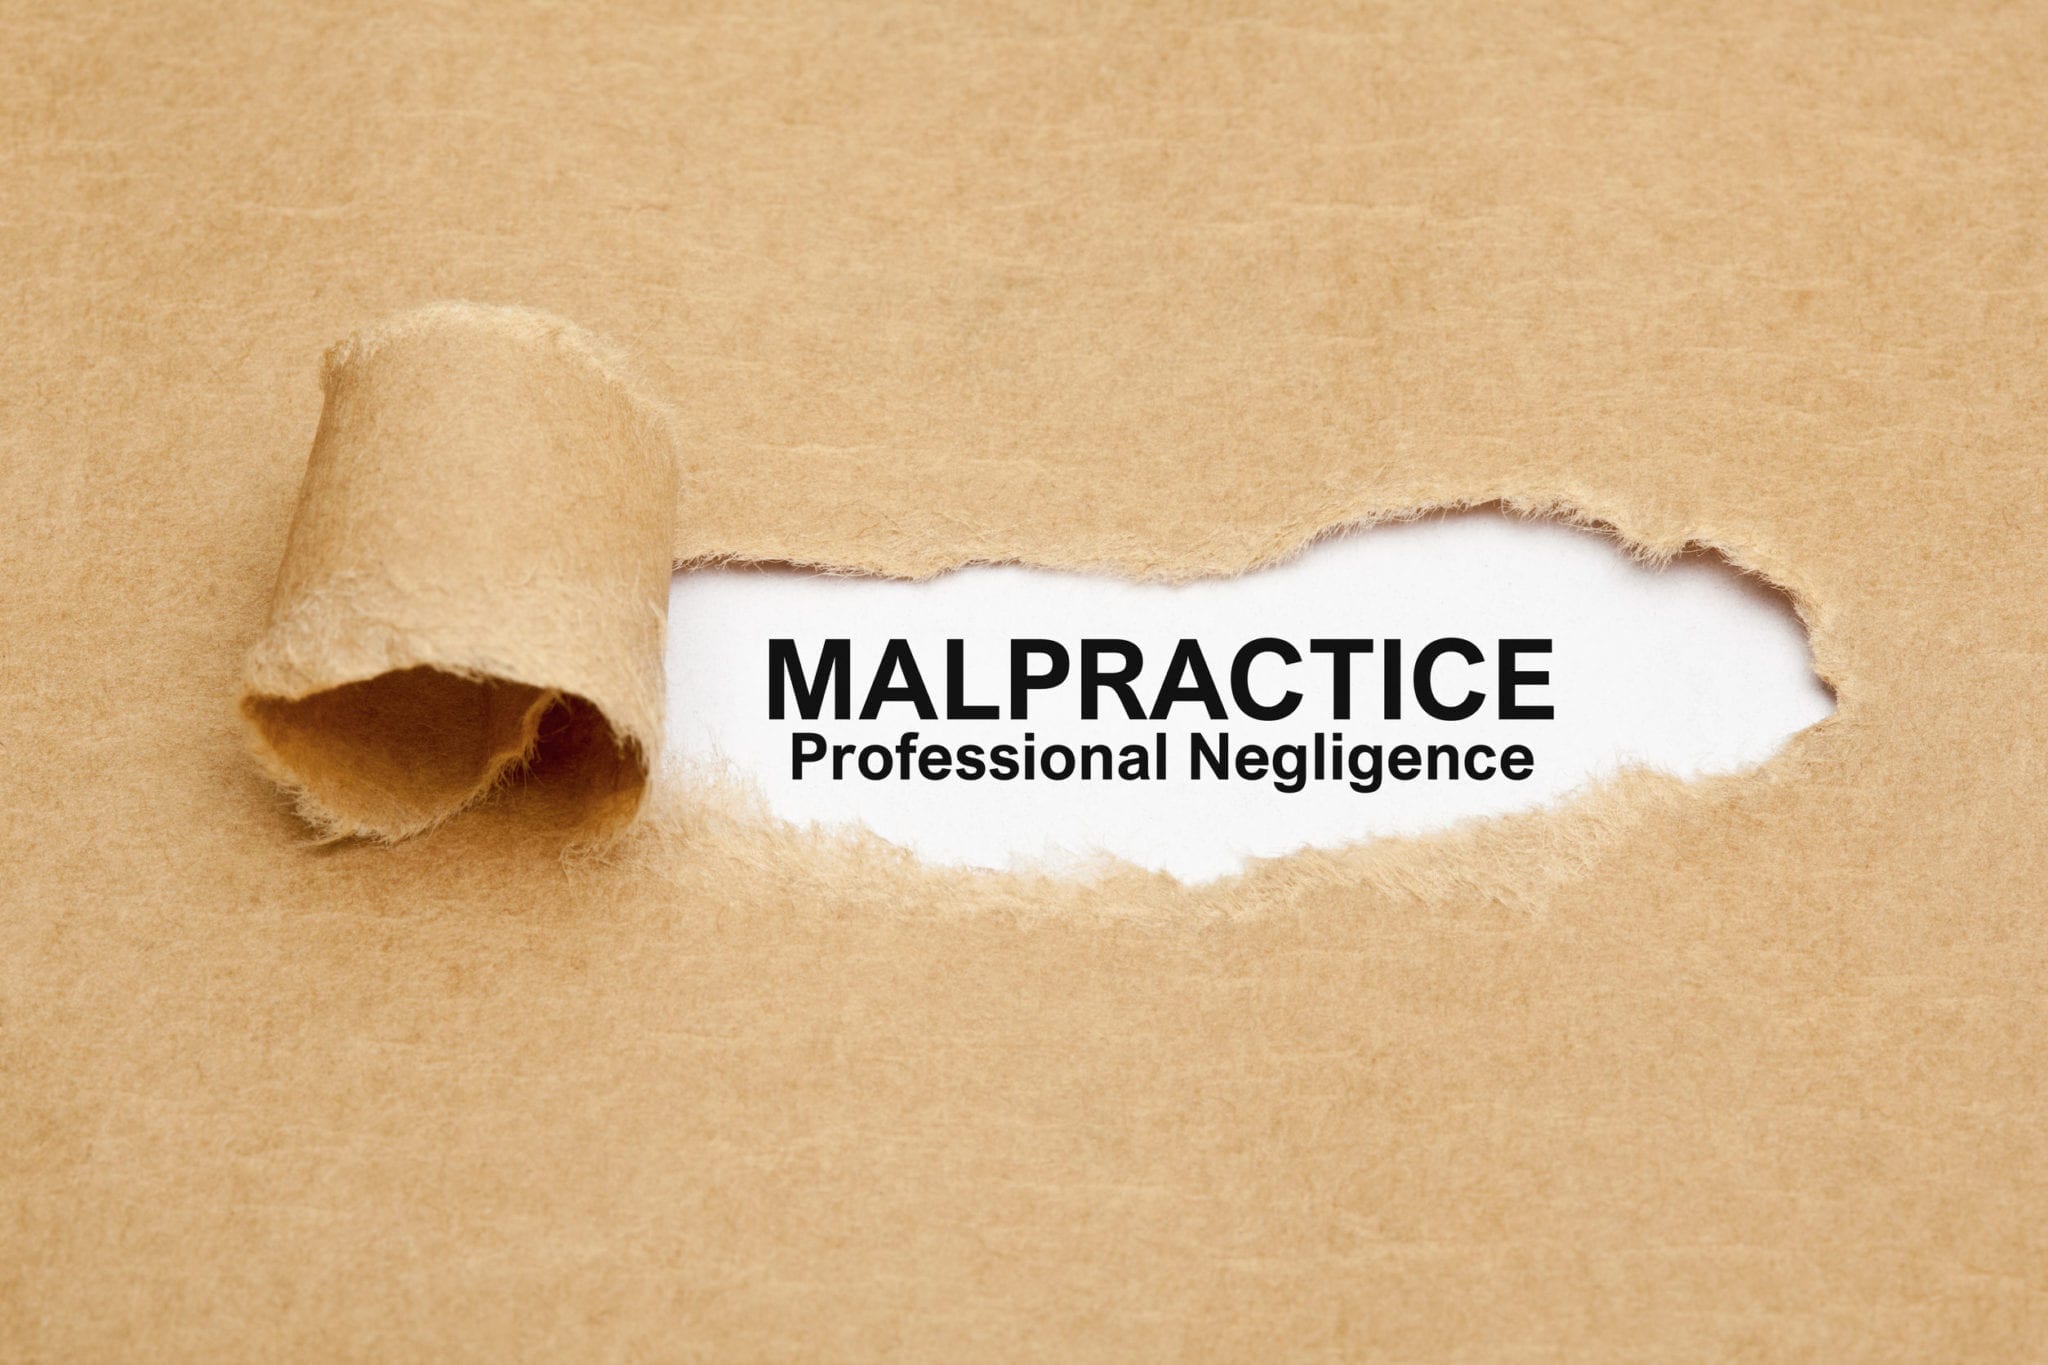 Legal Malpractice in Florida: What Damages Can You Sue For?